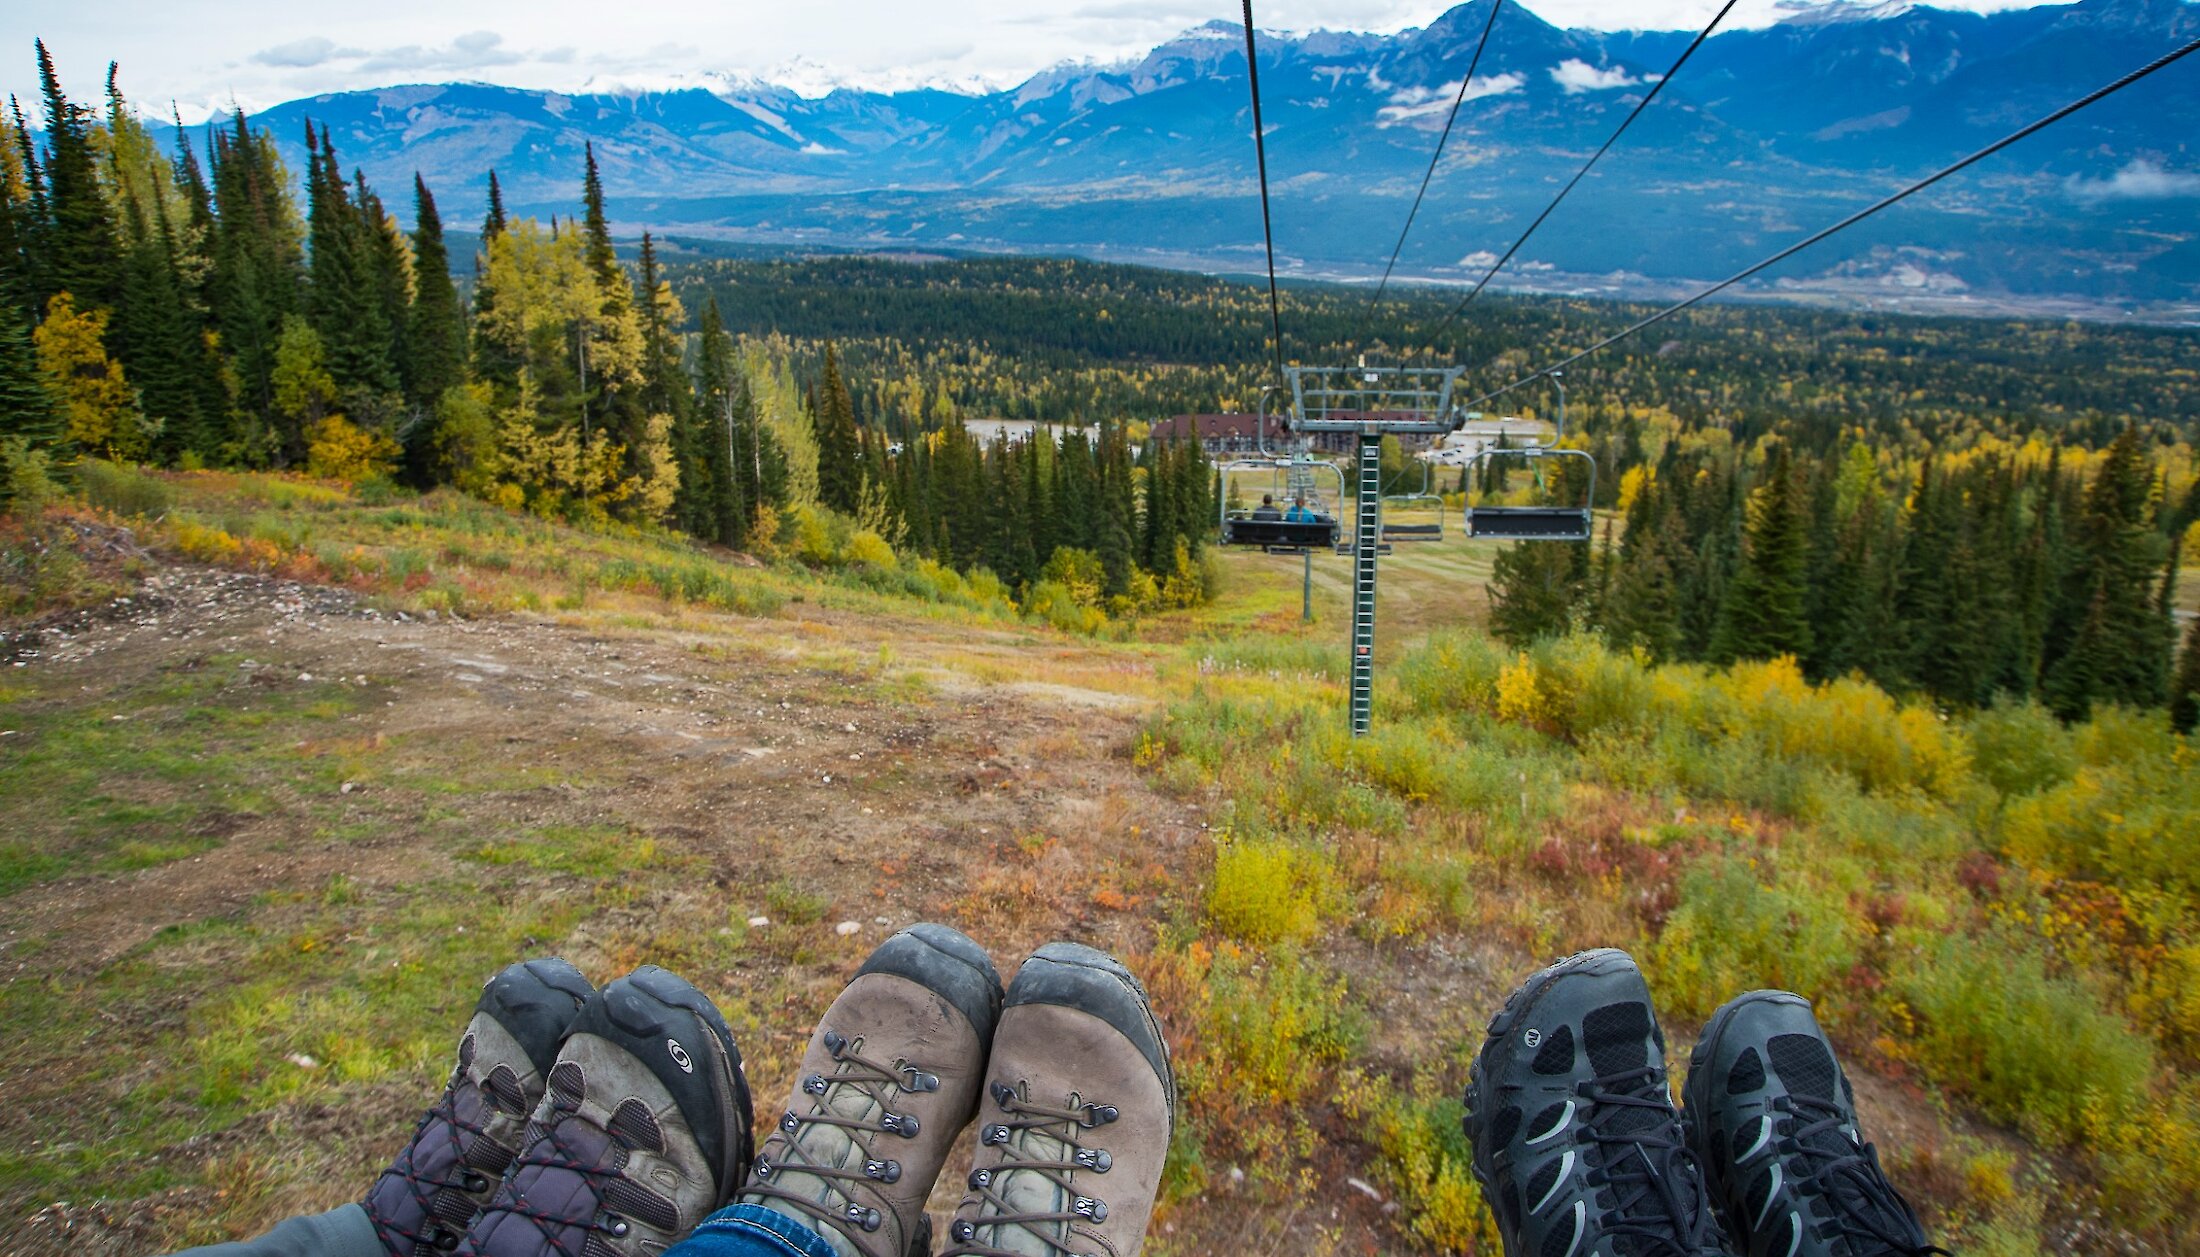 Peoples feet dangling off the chairlift at Kicking Horse Mountain Resort